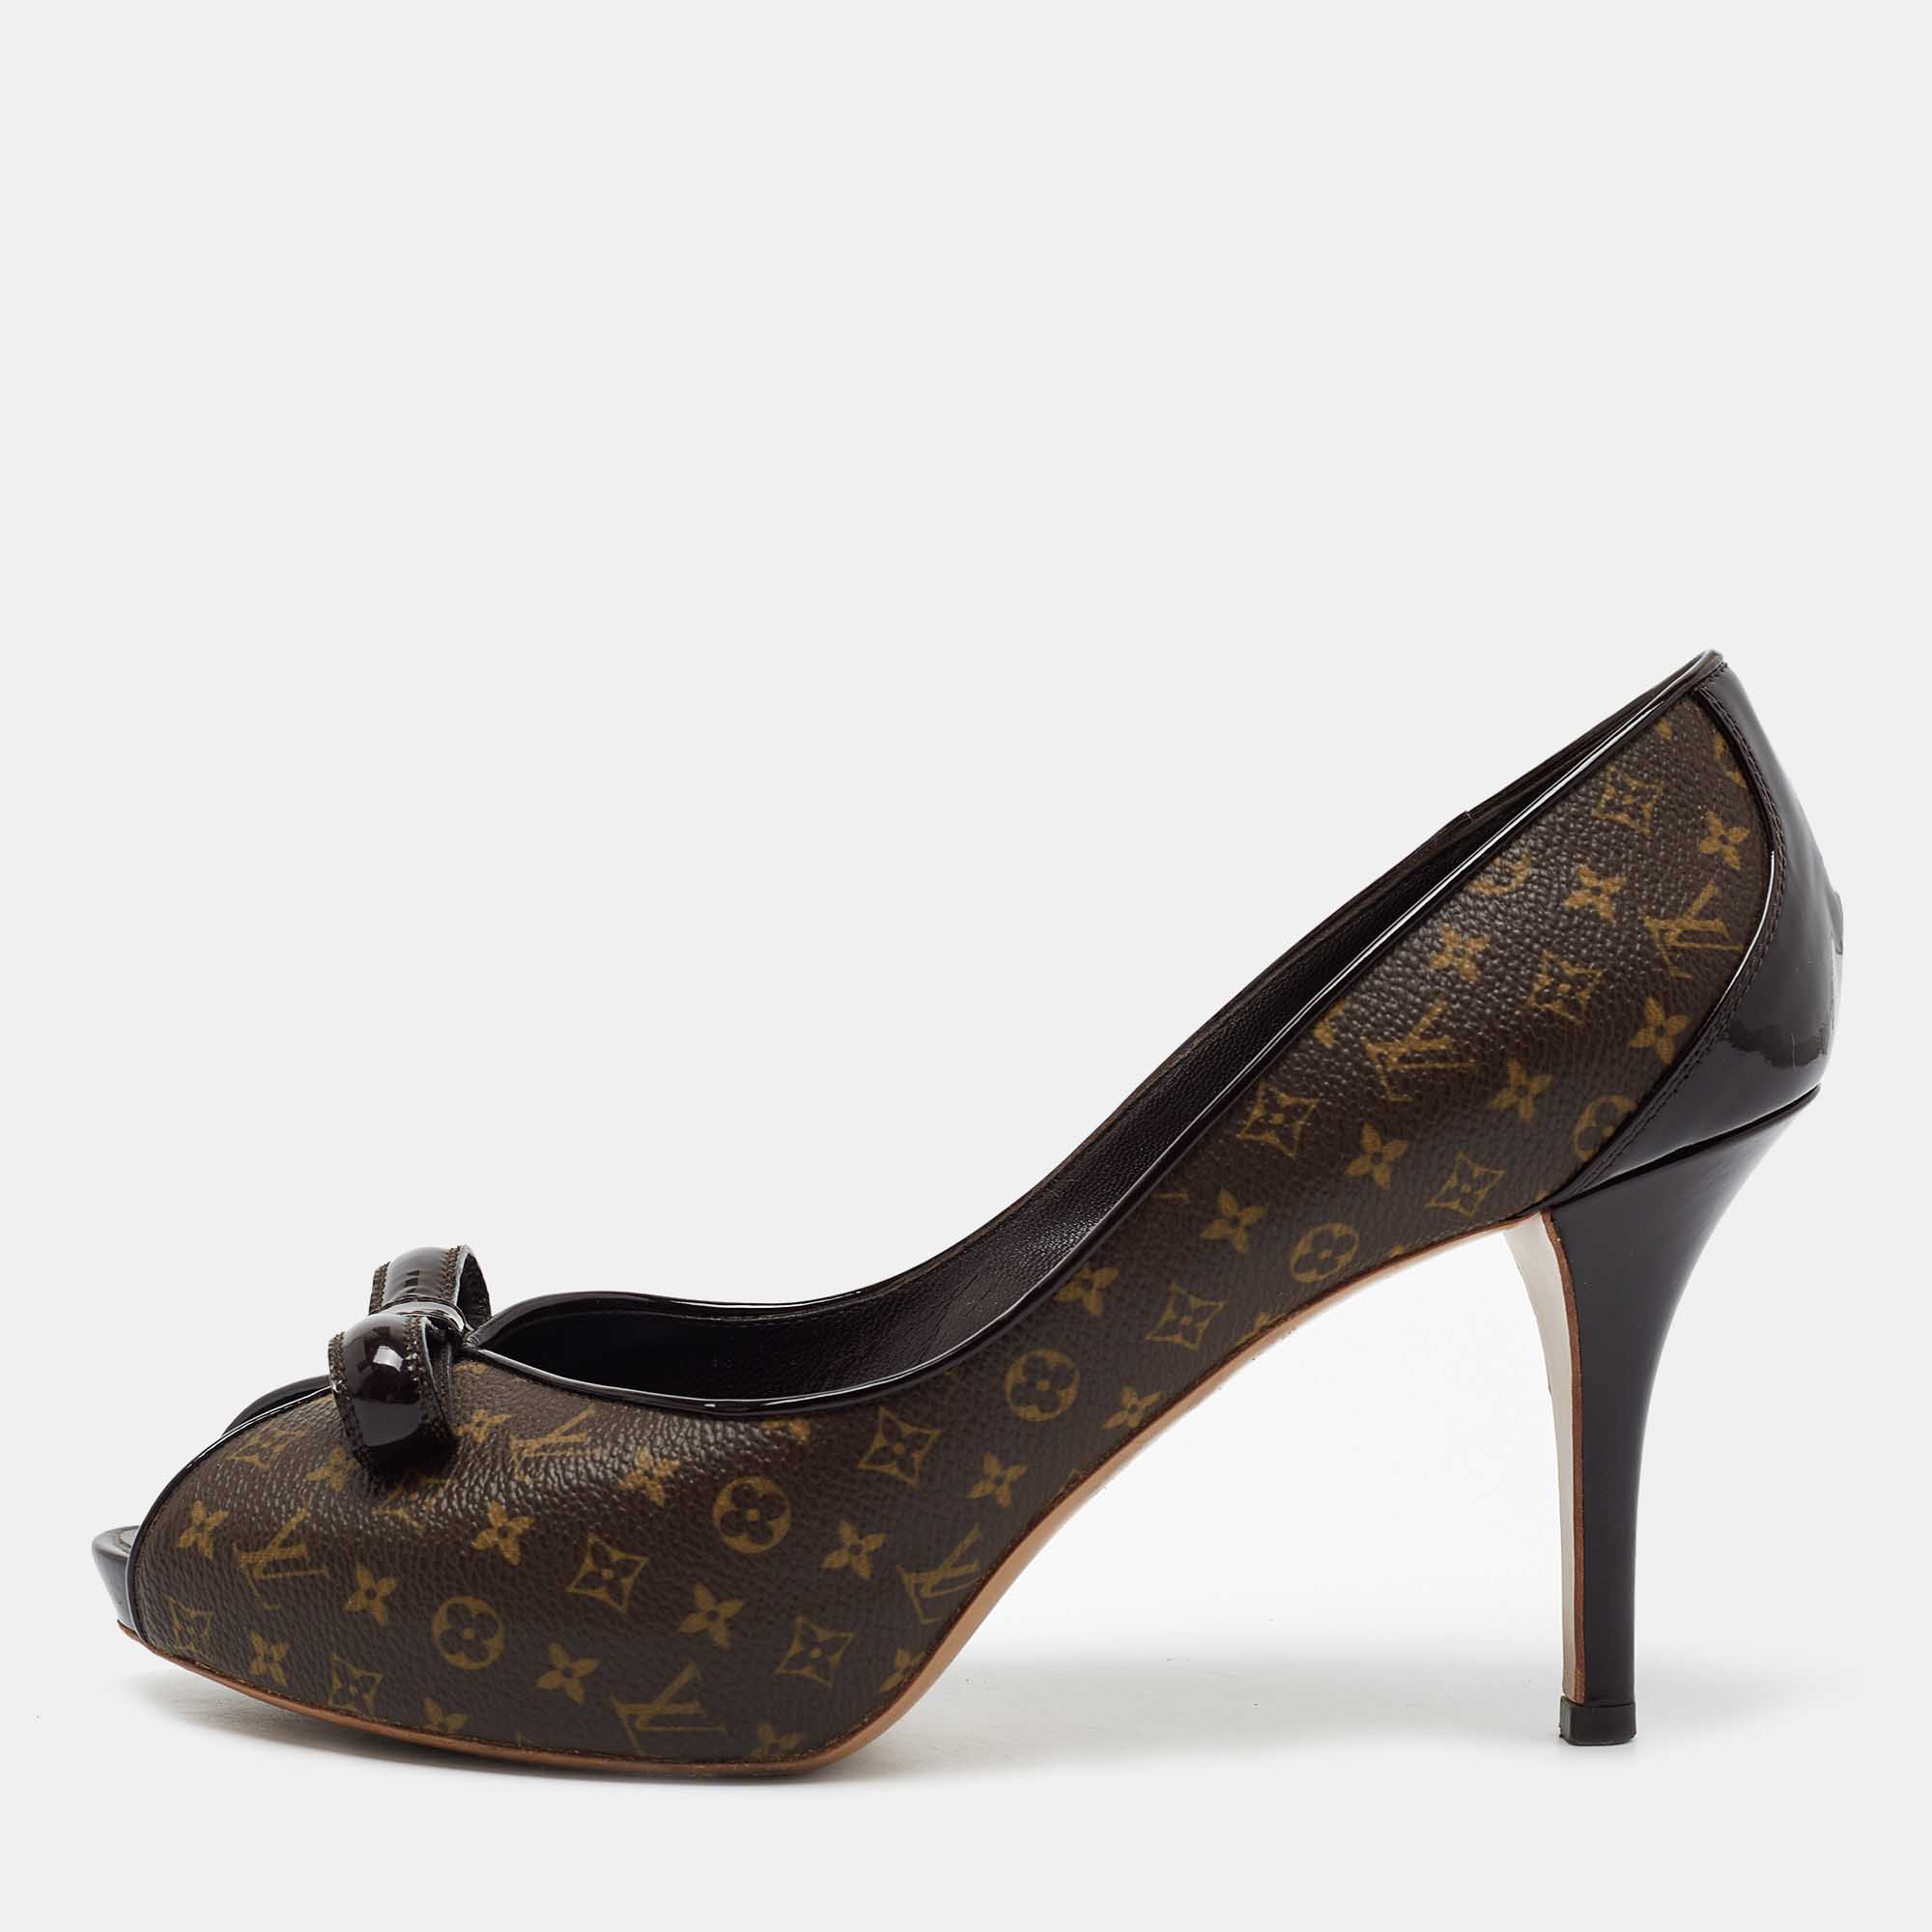 New LOUIS VUITTON Monogram Patent Pumps Made in Italy Sz 39